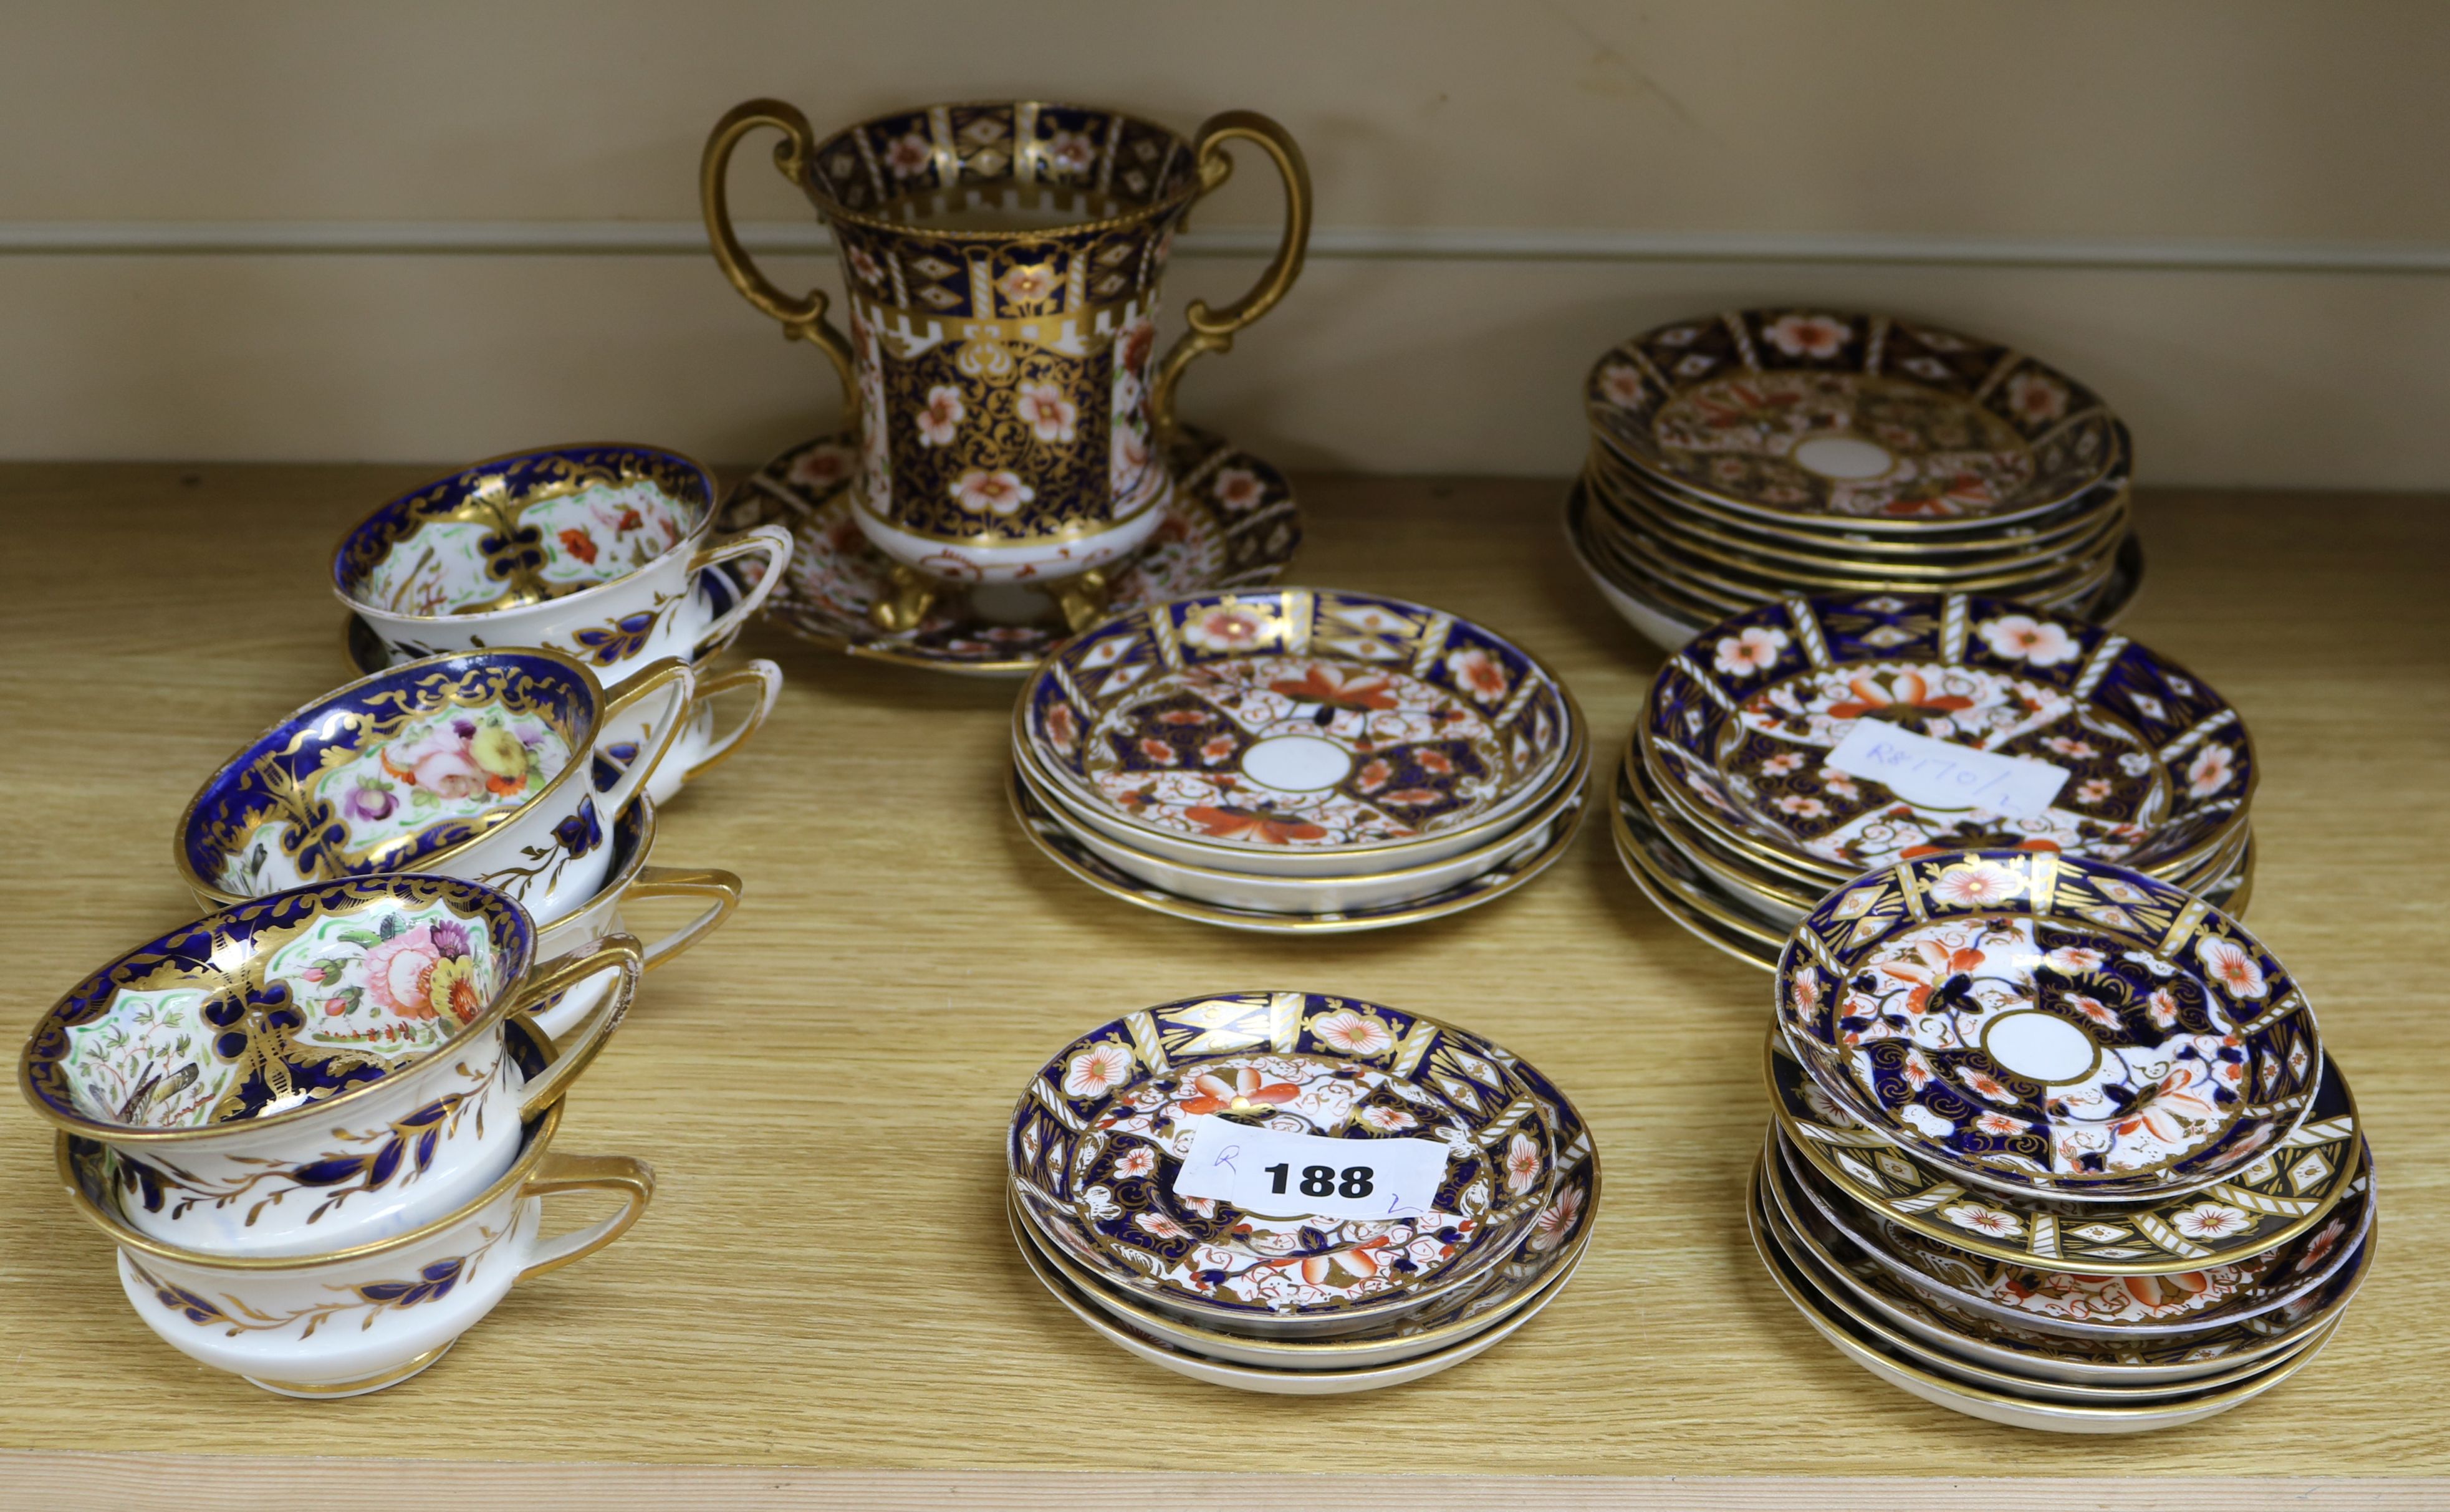 A large quantity of Royal Crown Derby Imari style patterned plates, saucers and a two-handled base